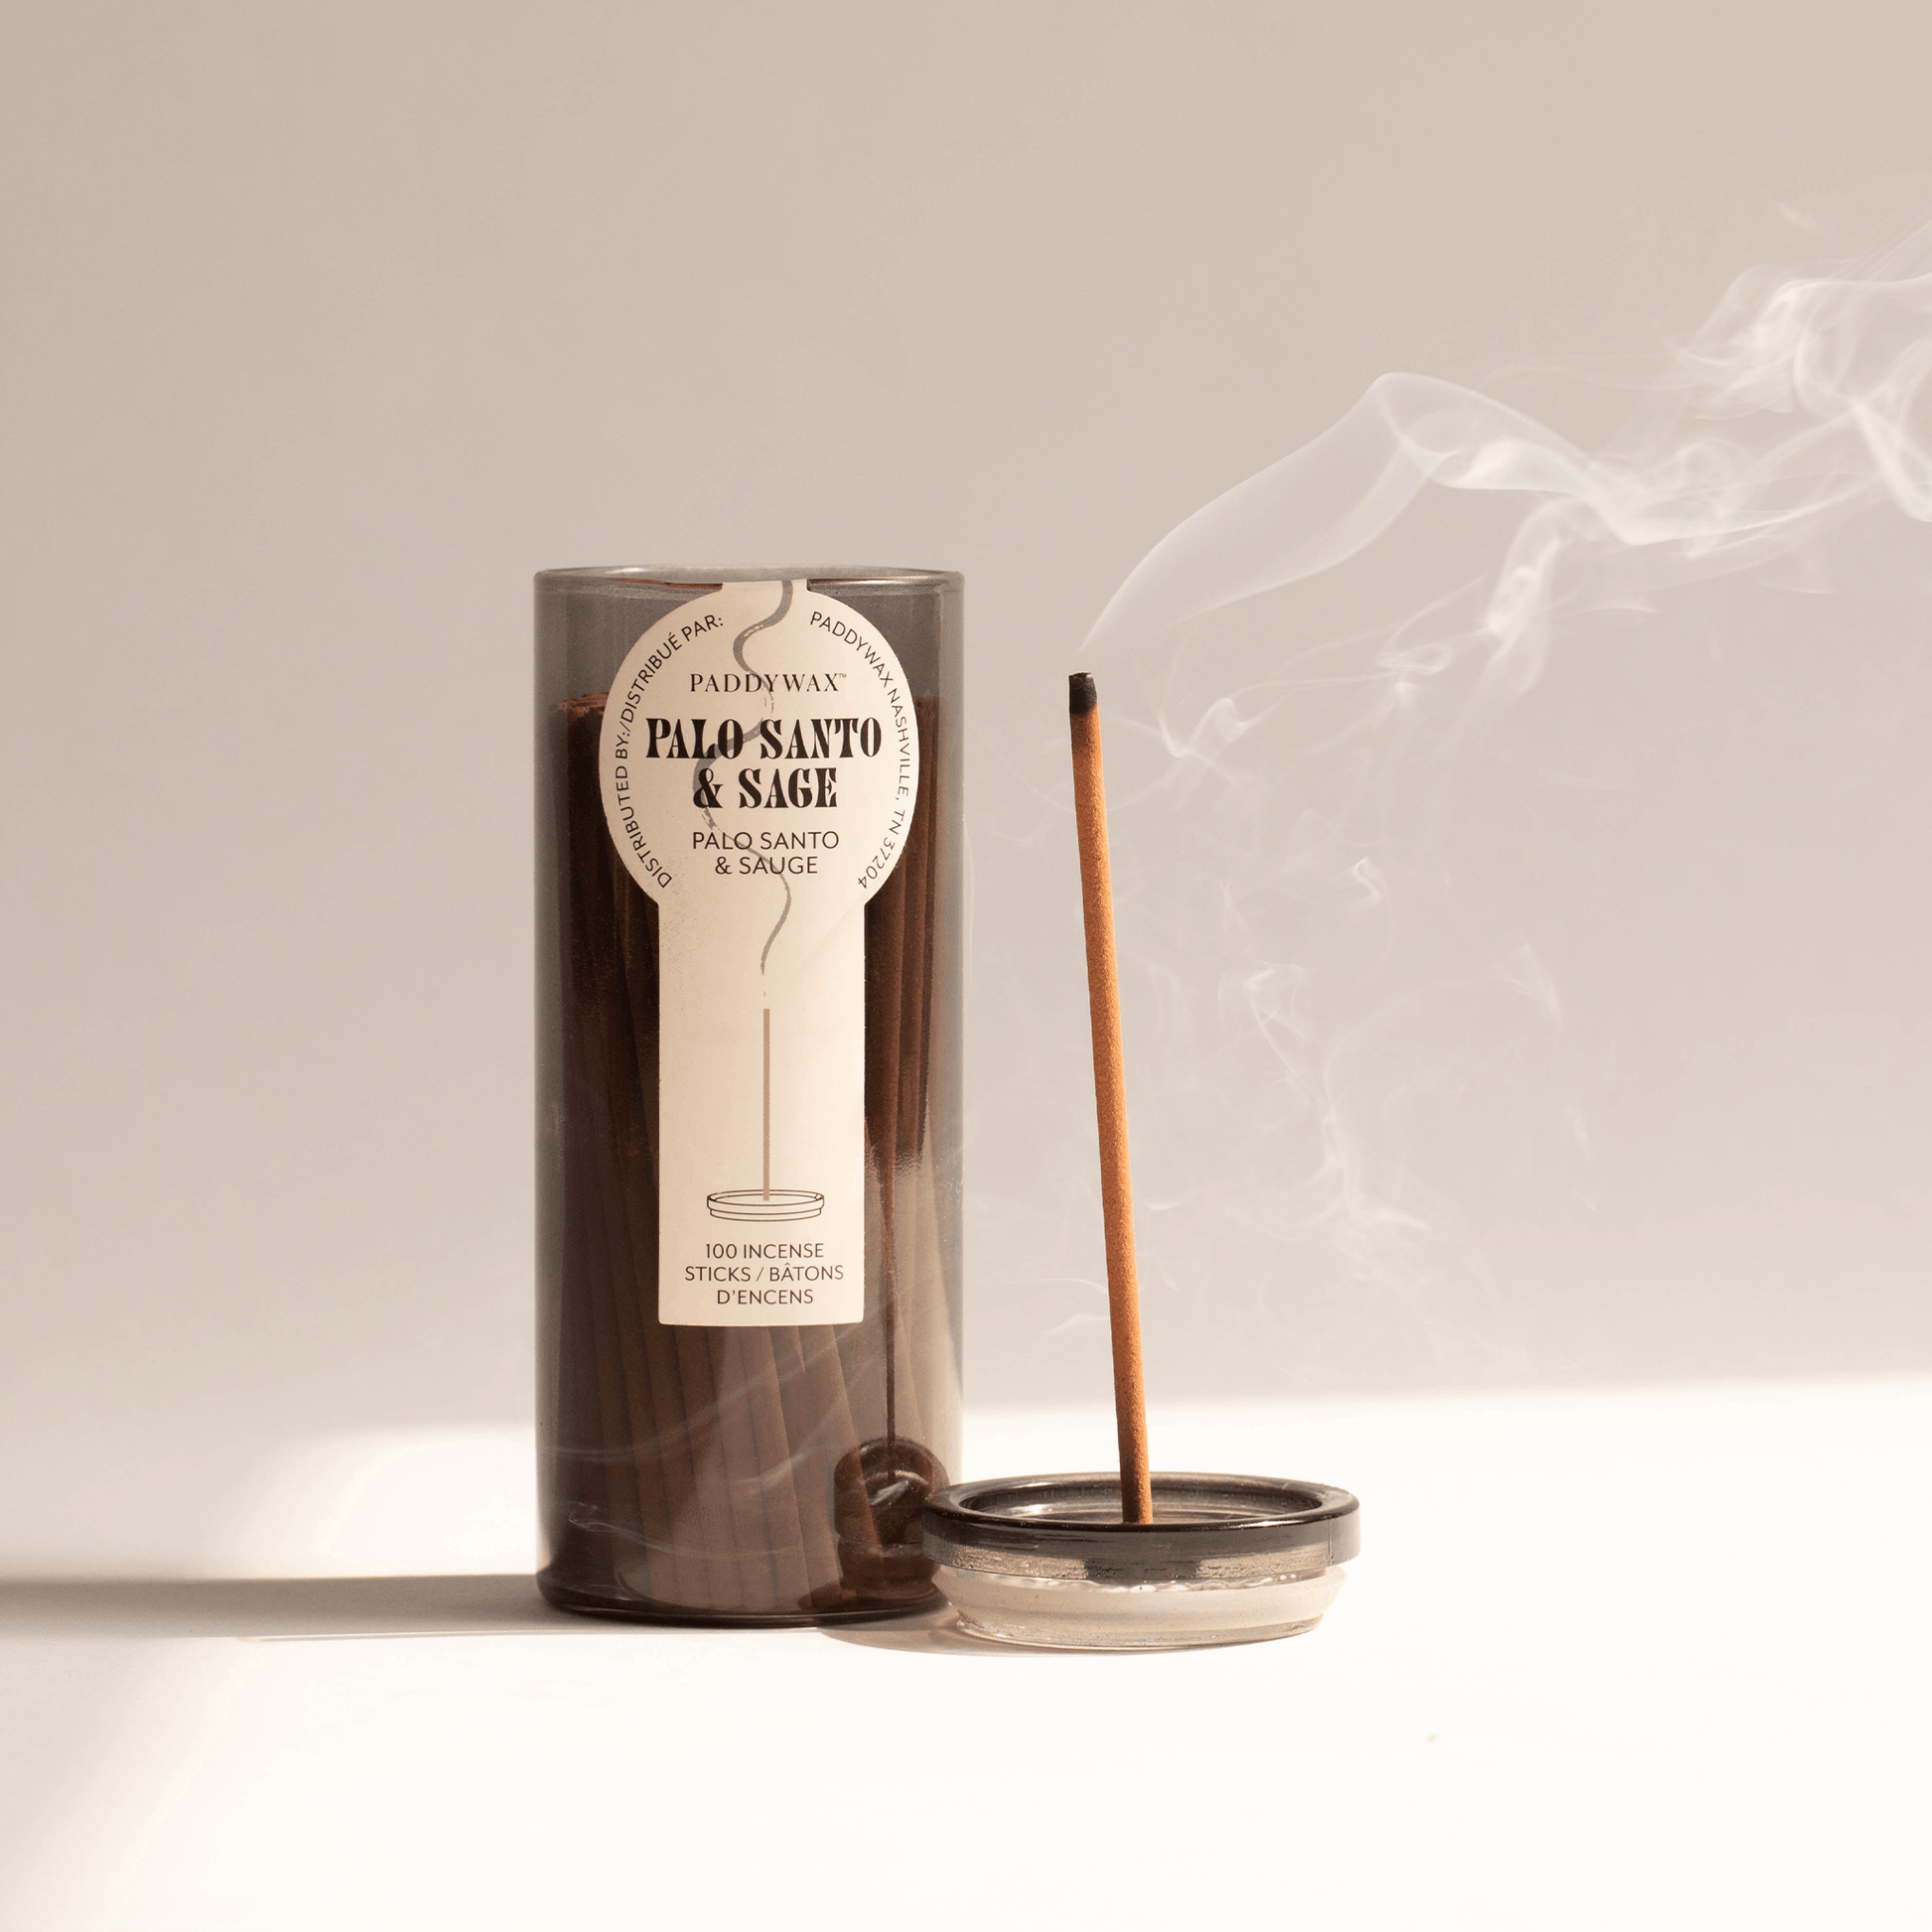 Gray glass cylinder with white label holding 100 incense sticks for flameless fragrance; pictured next to burning incense stick